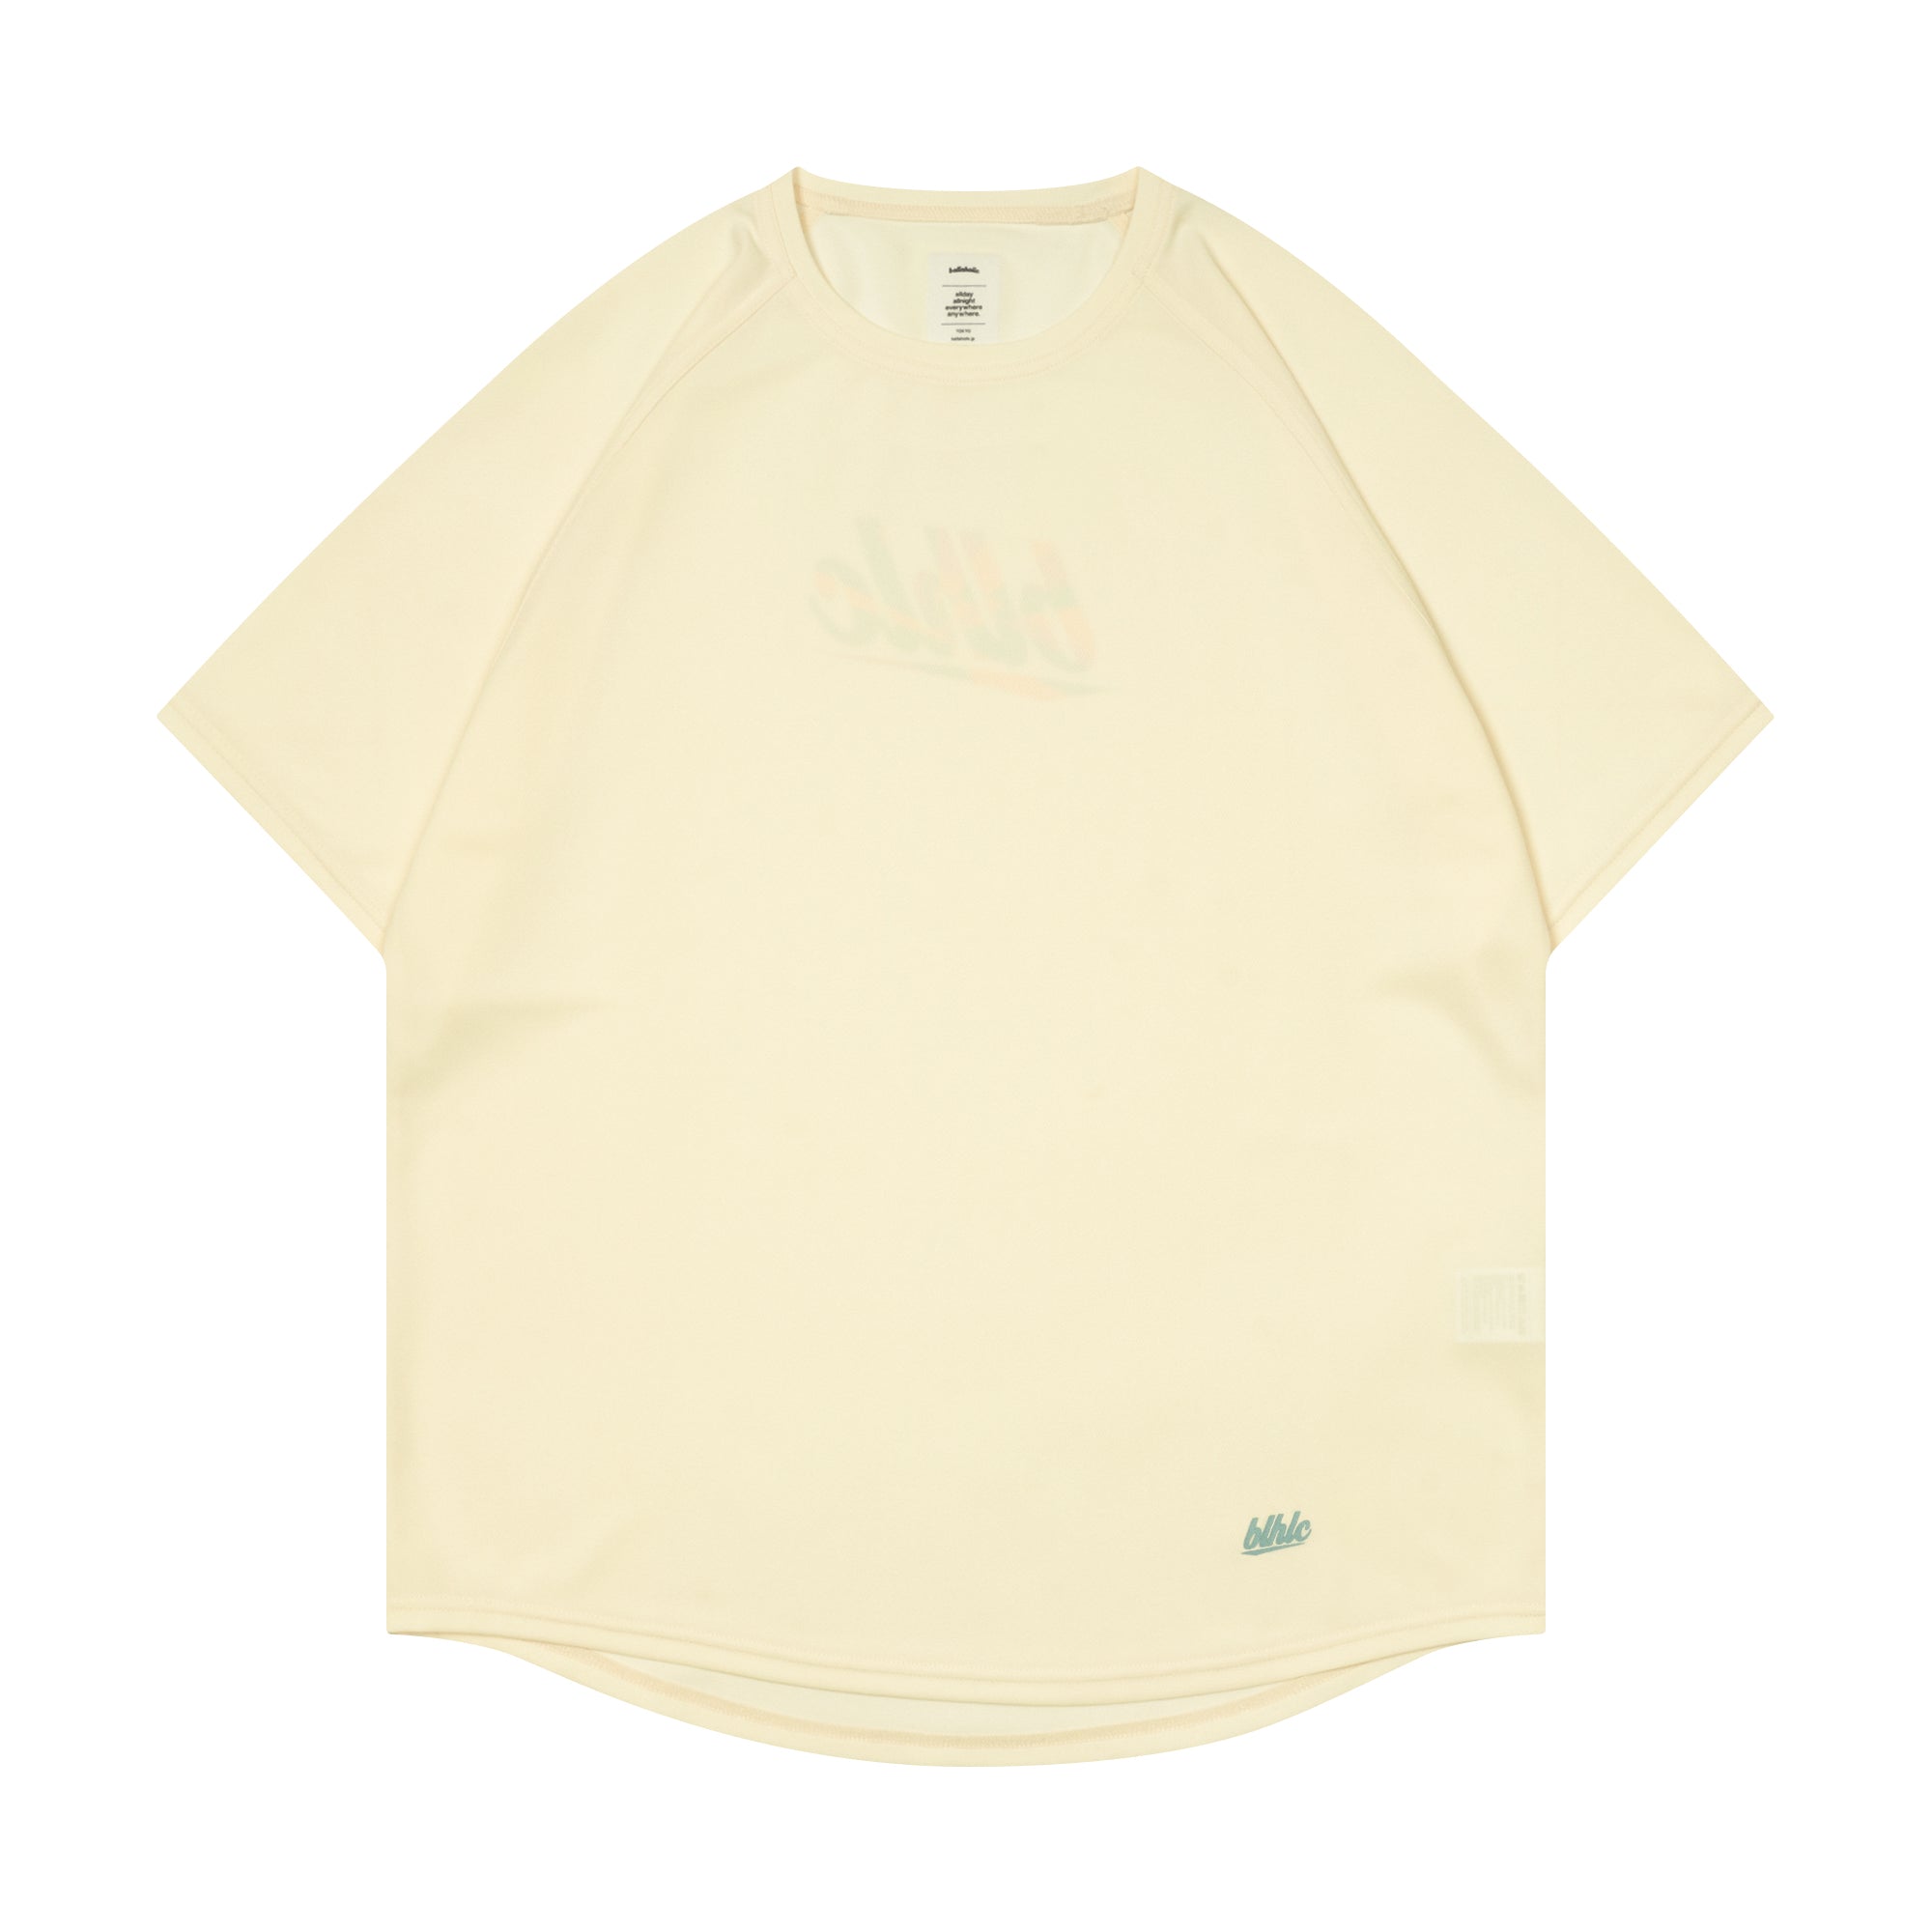 blhlc Back Print Cool Tee (ivory/south)